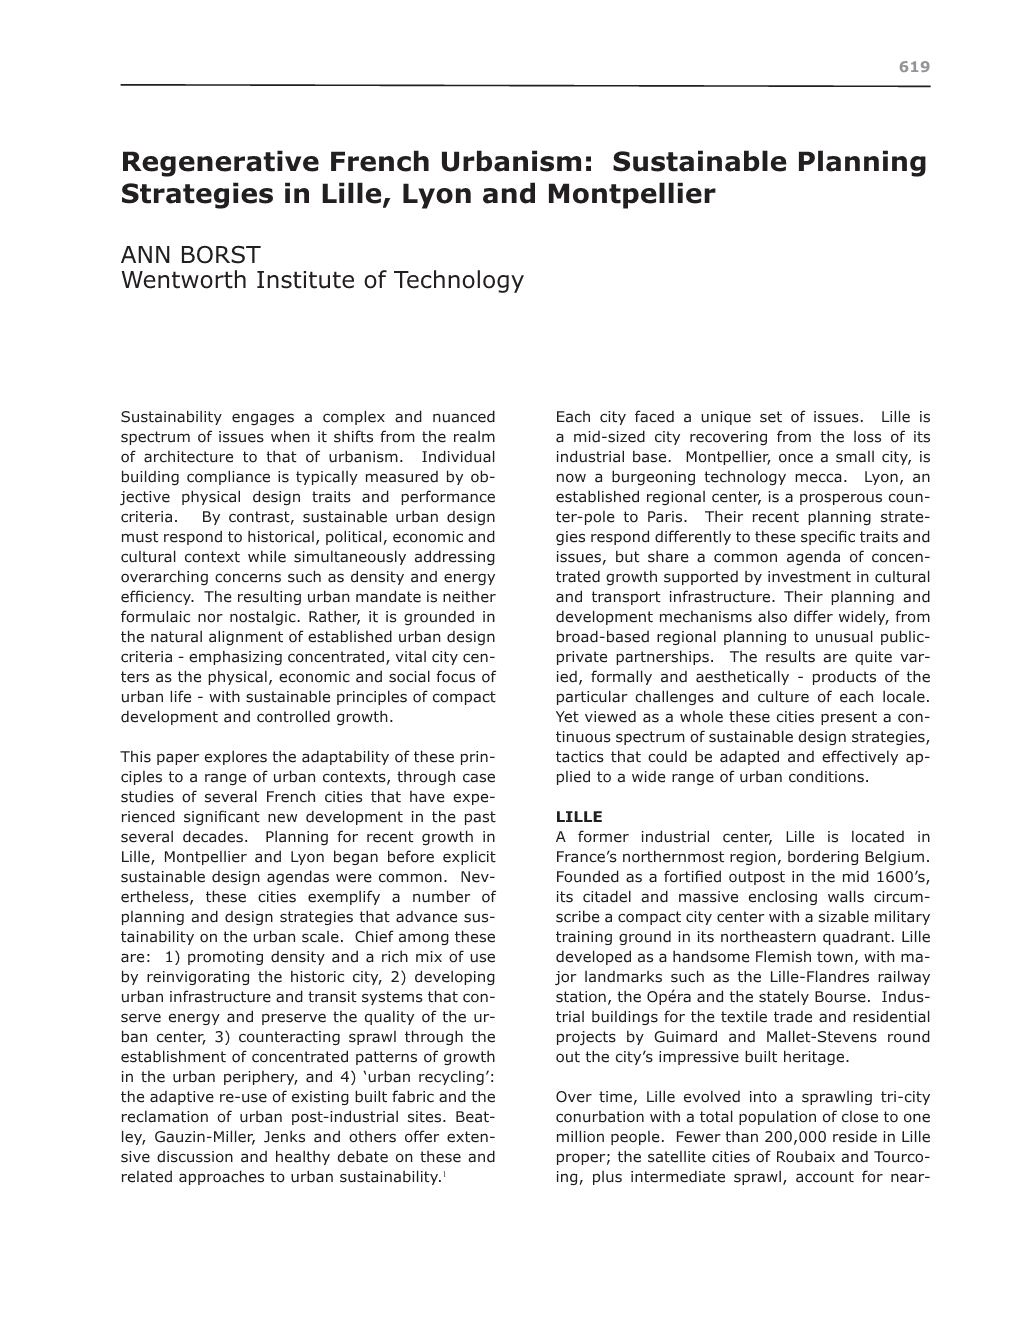 Sustainable Planning Strategies in Lille, Lyon and Montpellier